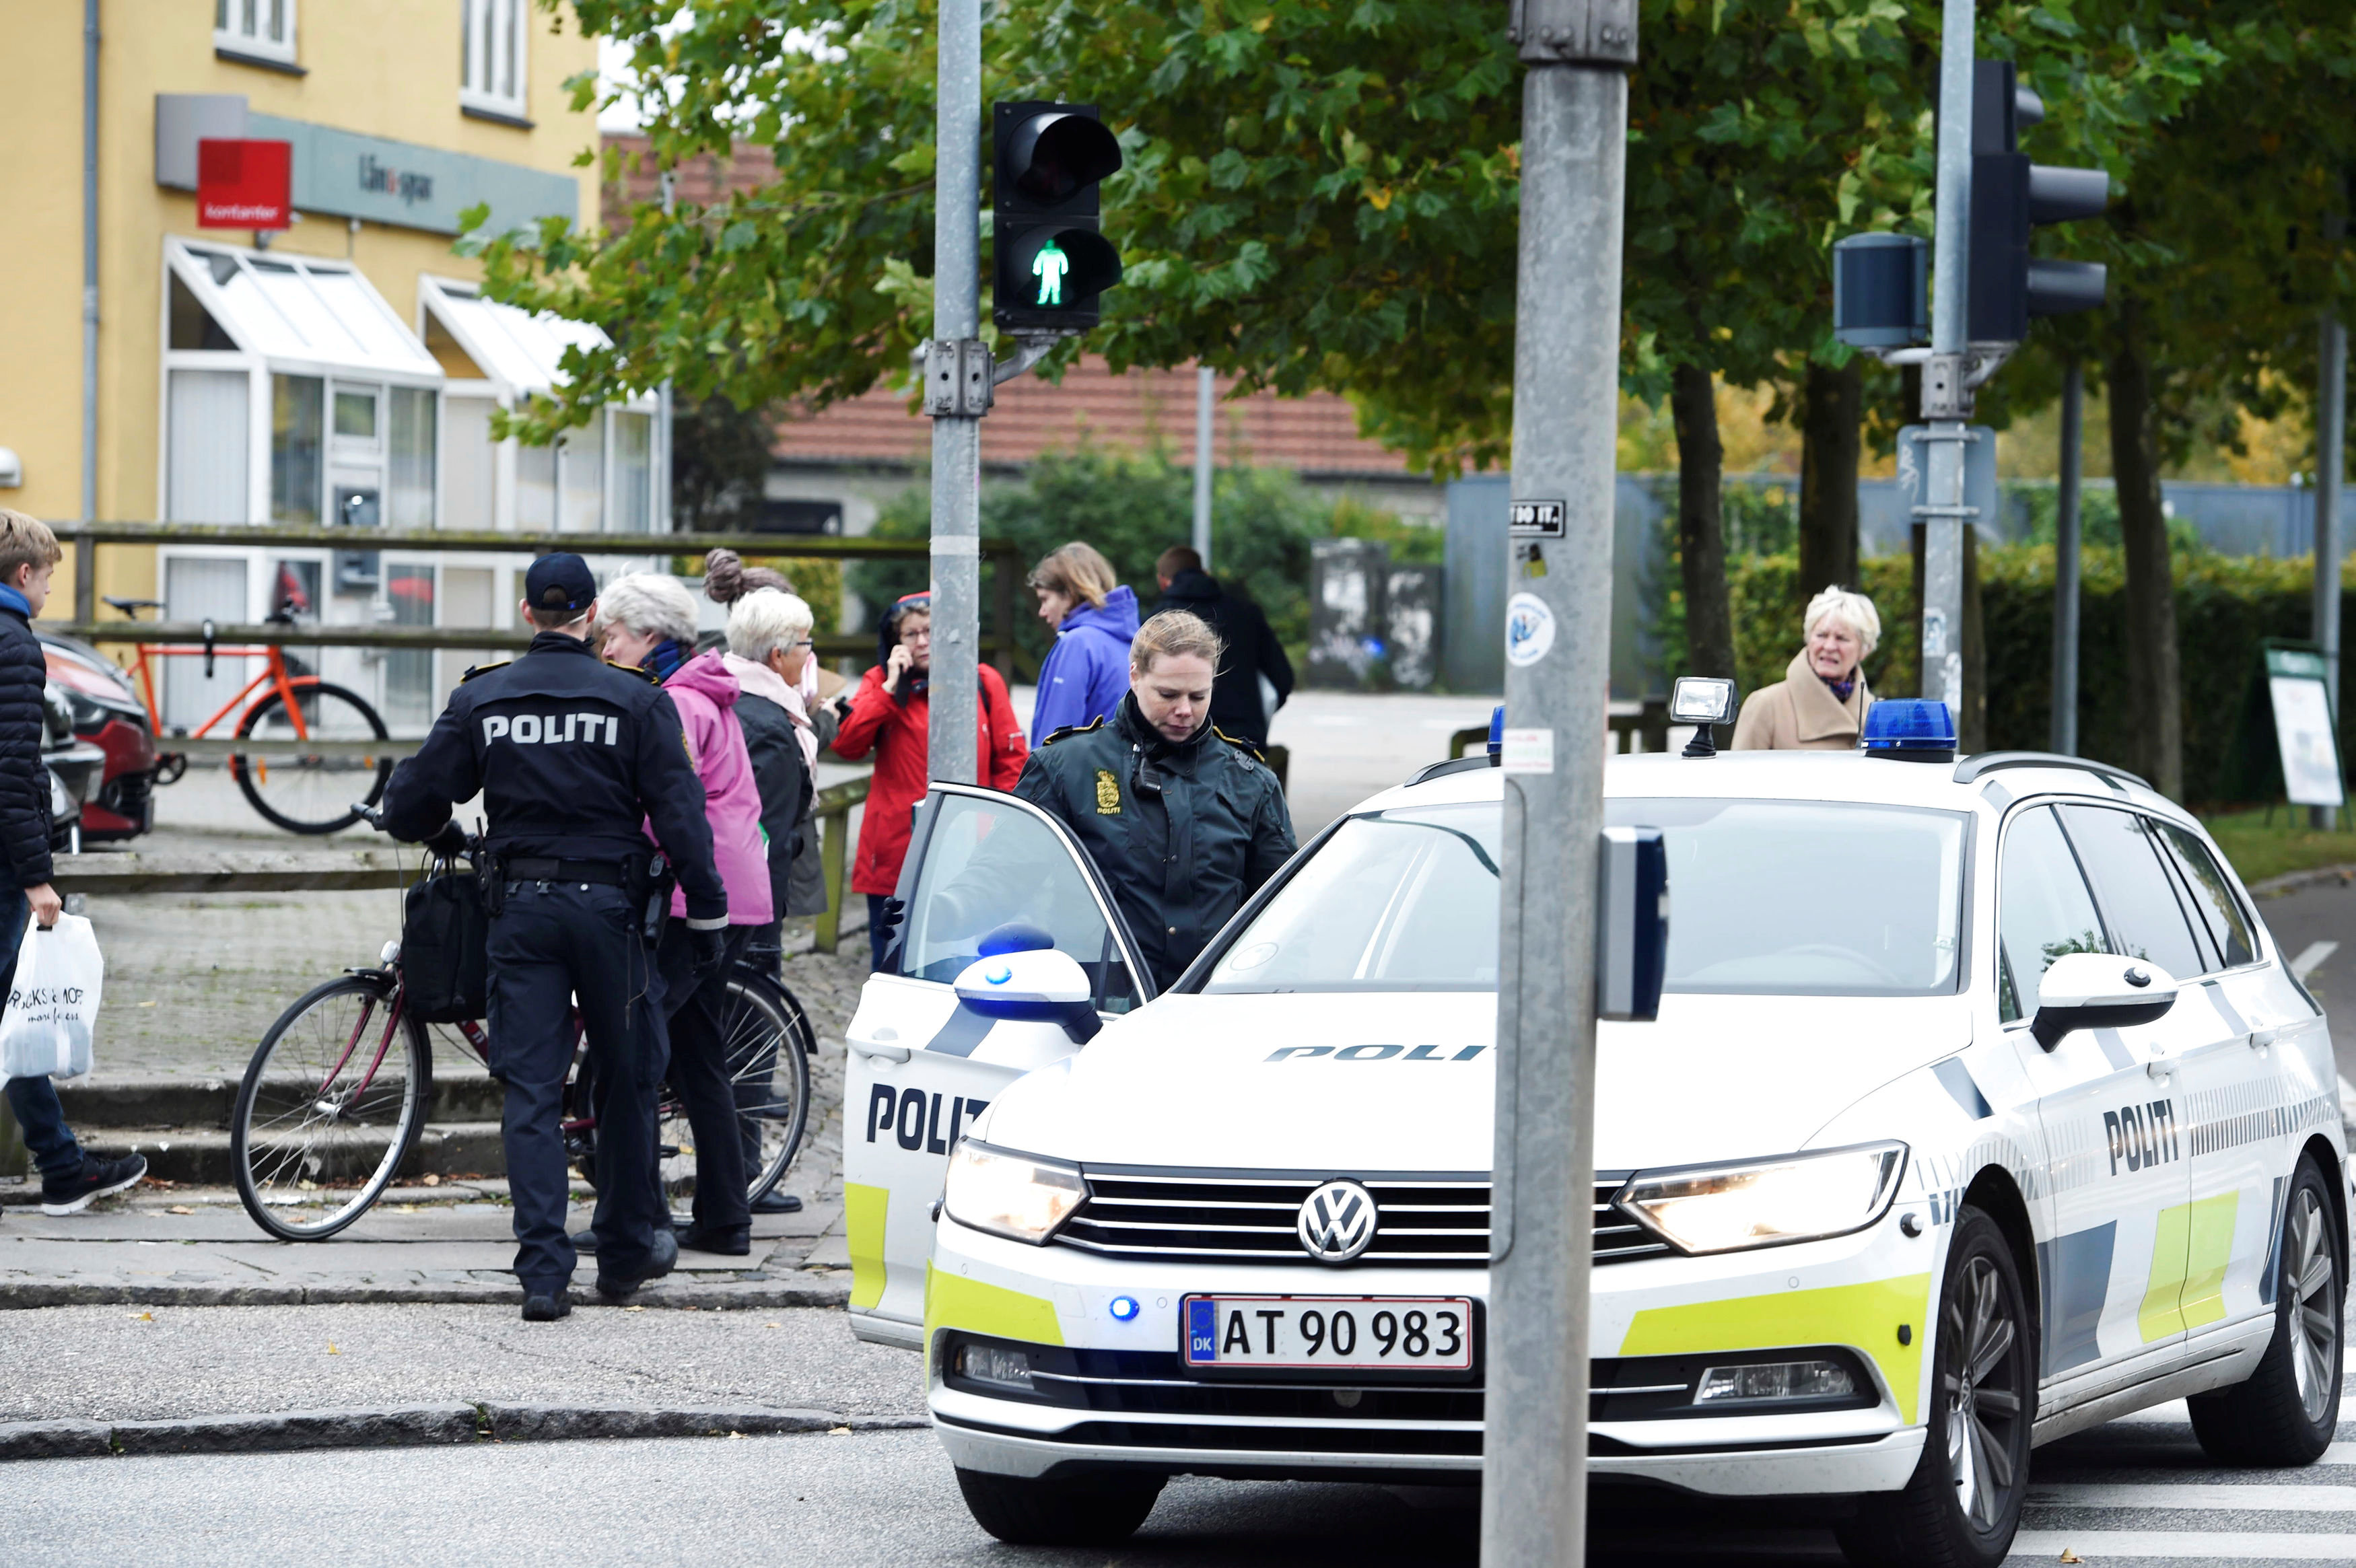 Two Danish airports, shopping centres evacuated after bomb threats